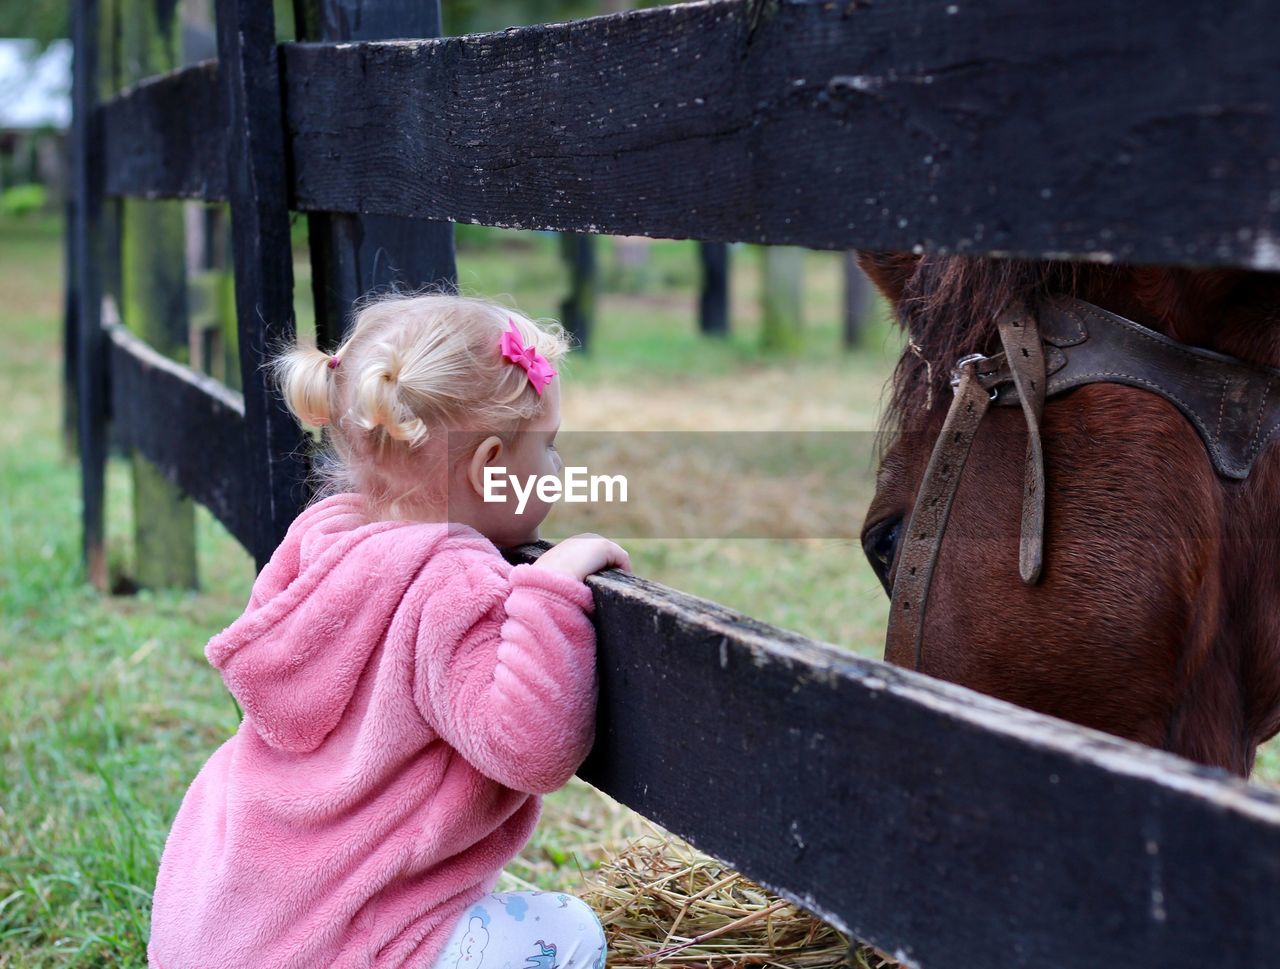 Girl looking at horse while leaning on fence